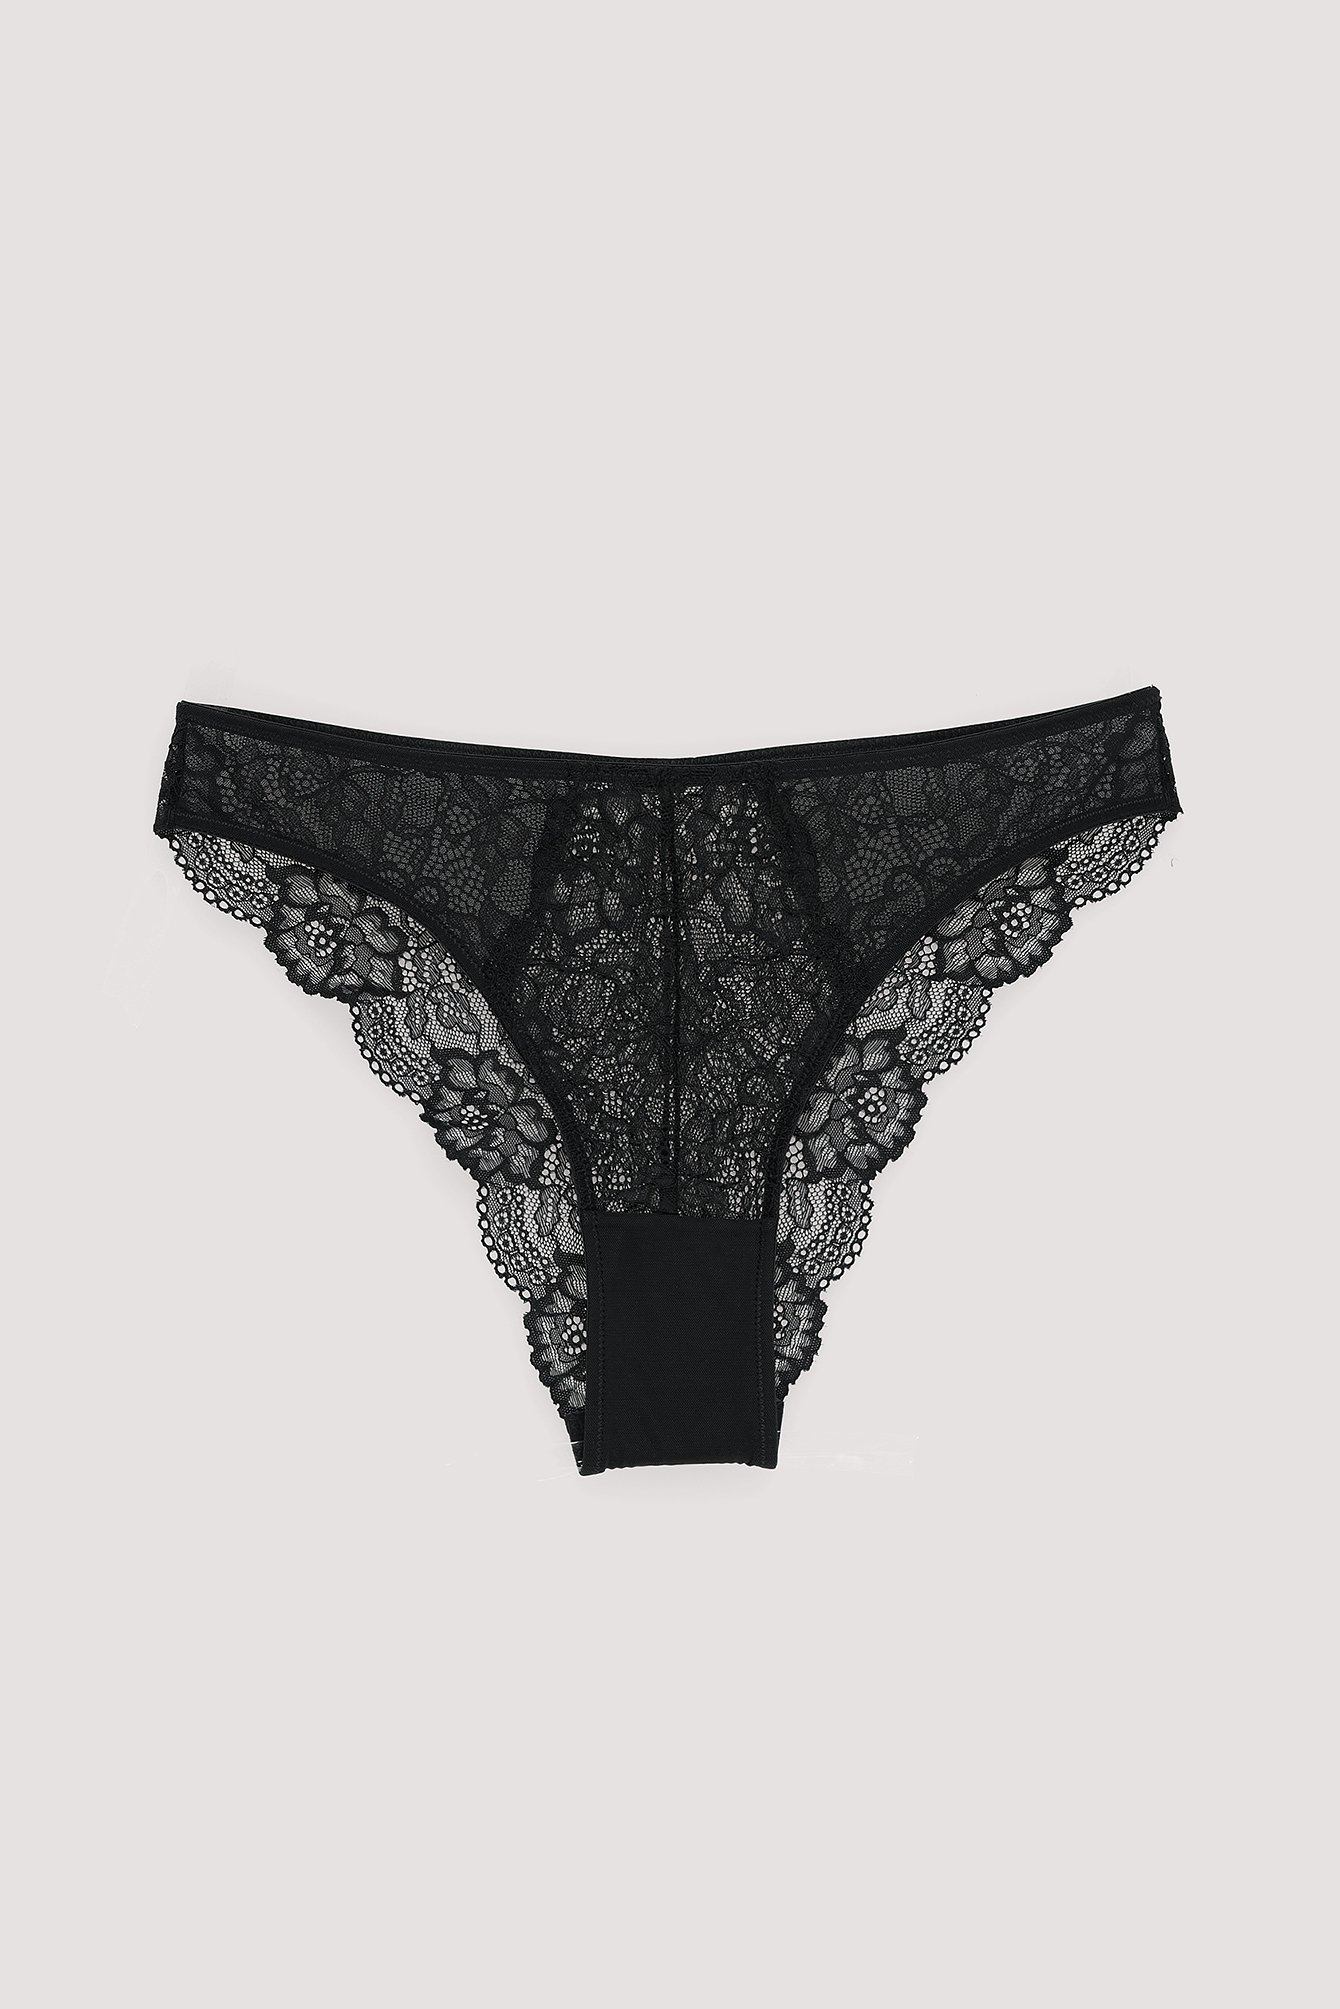 Black bow lace panties - made to measure possible